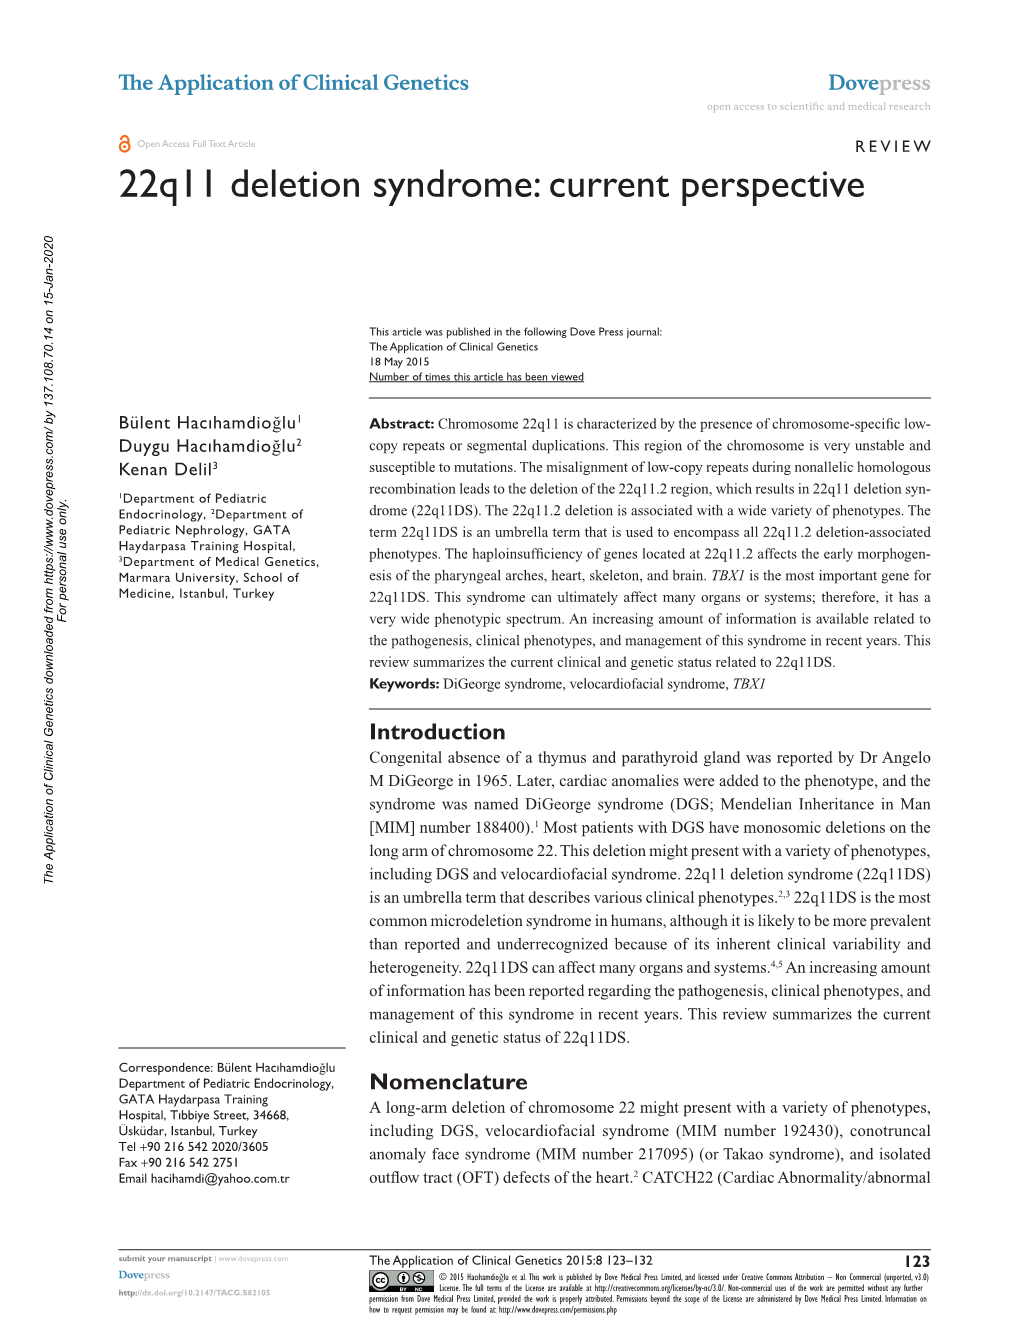 22Q11 Deletion Syndrome: Current Perspective